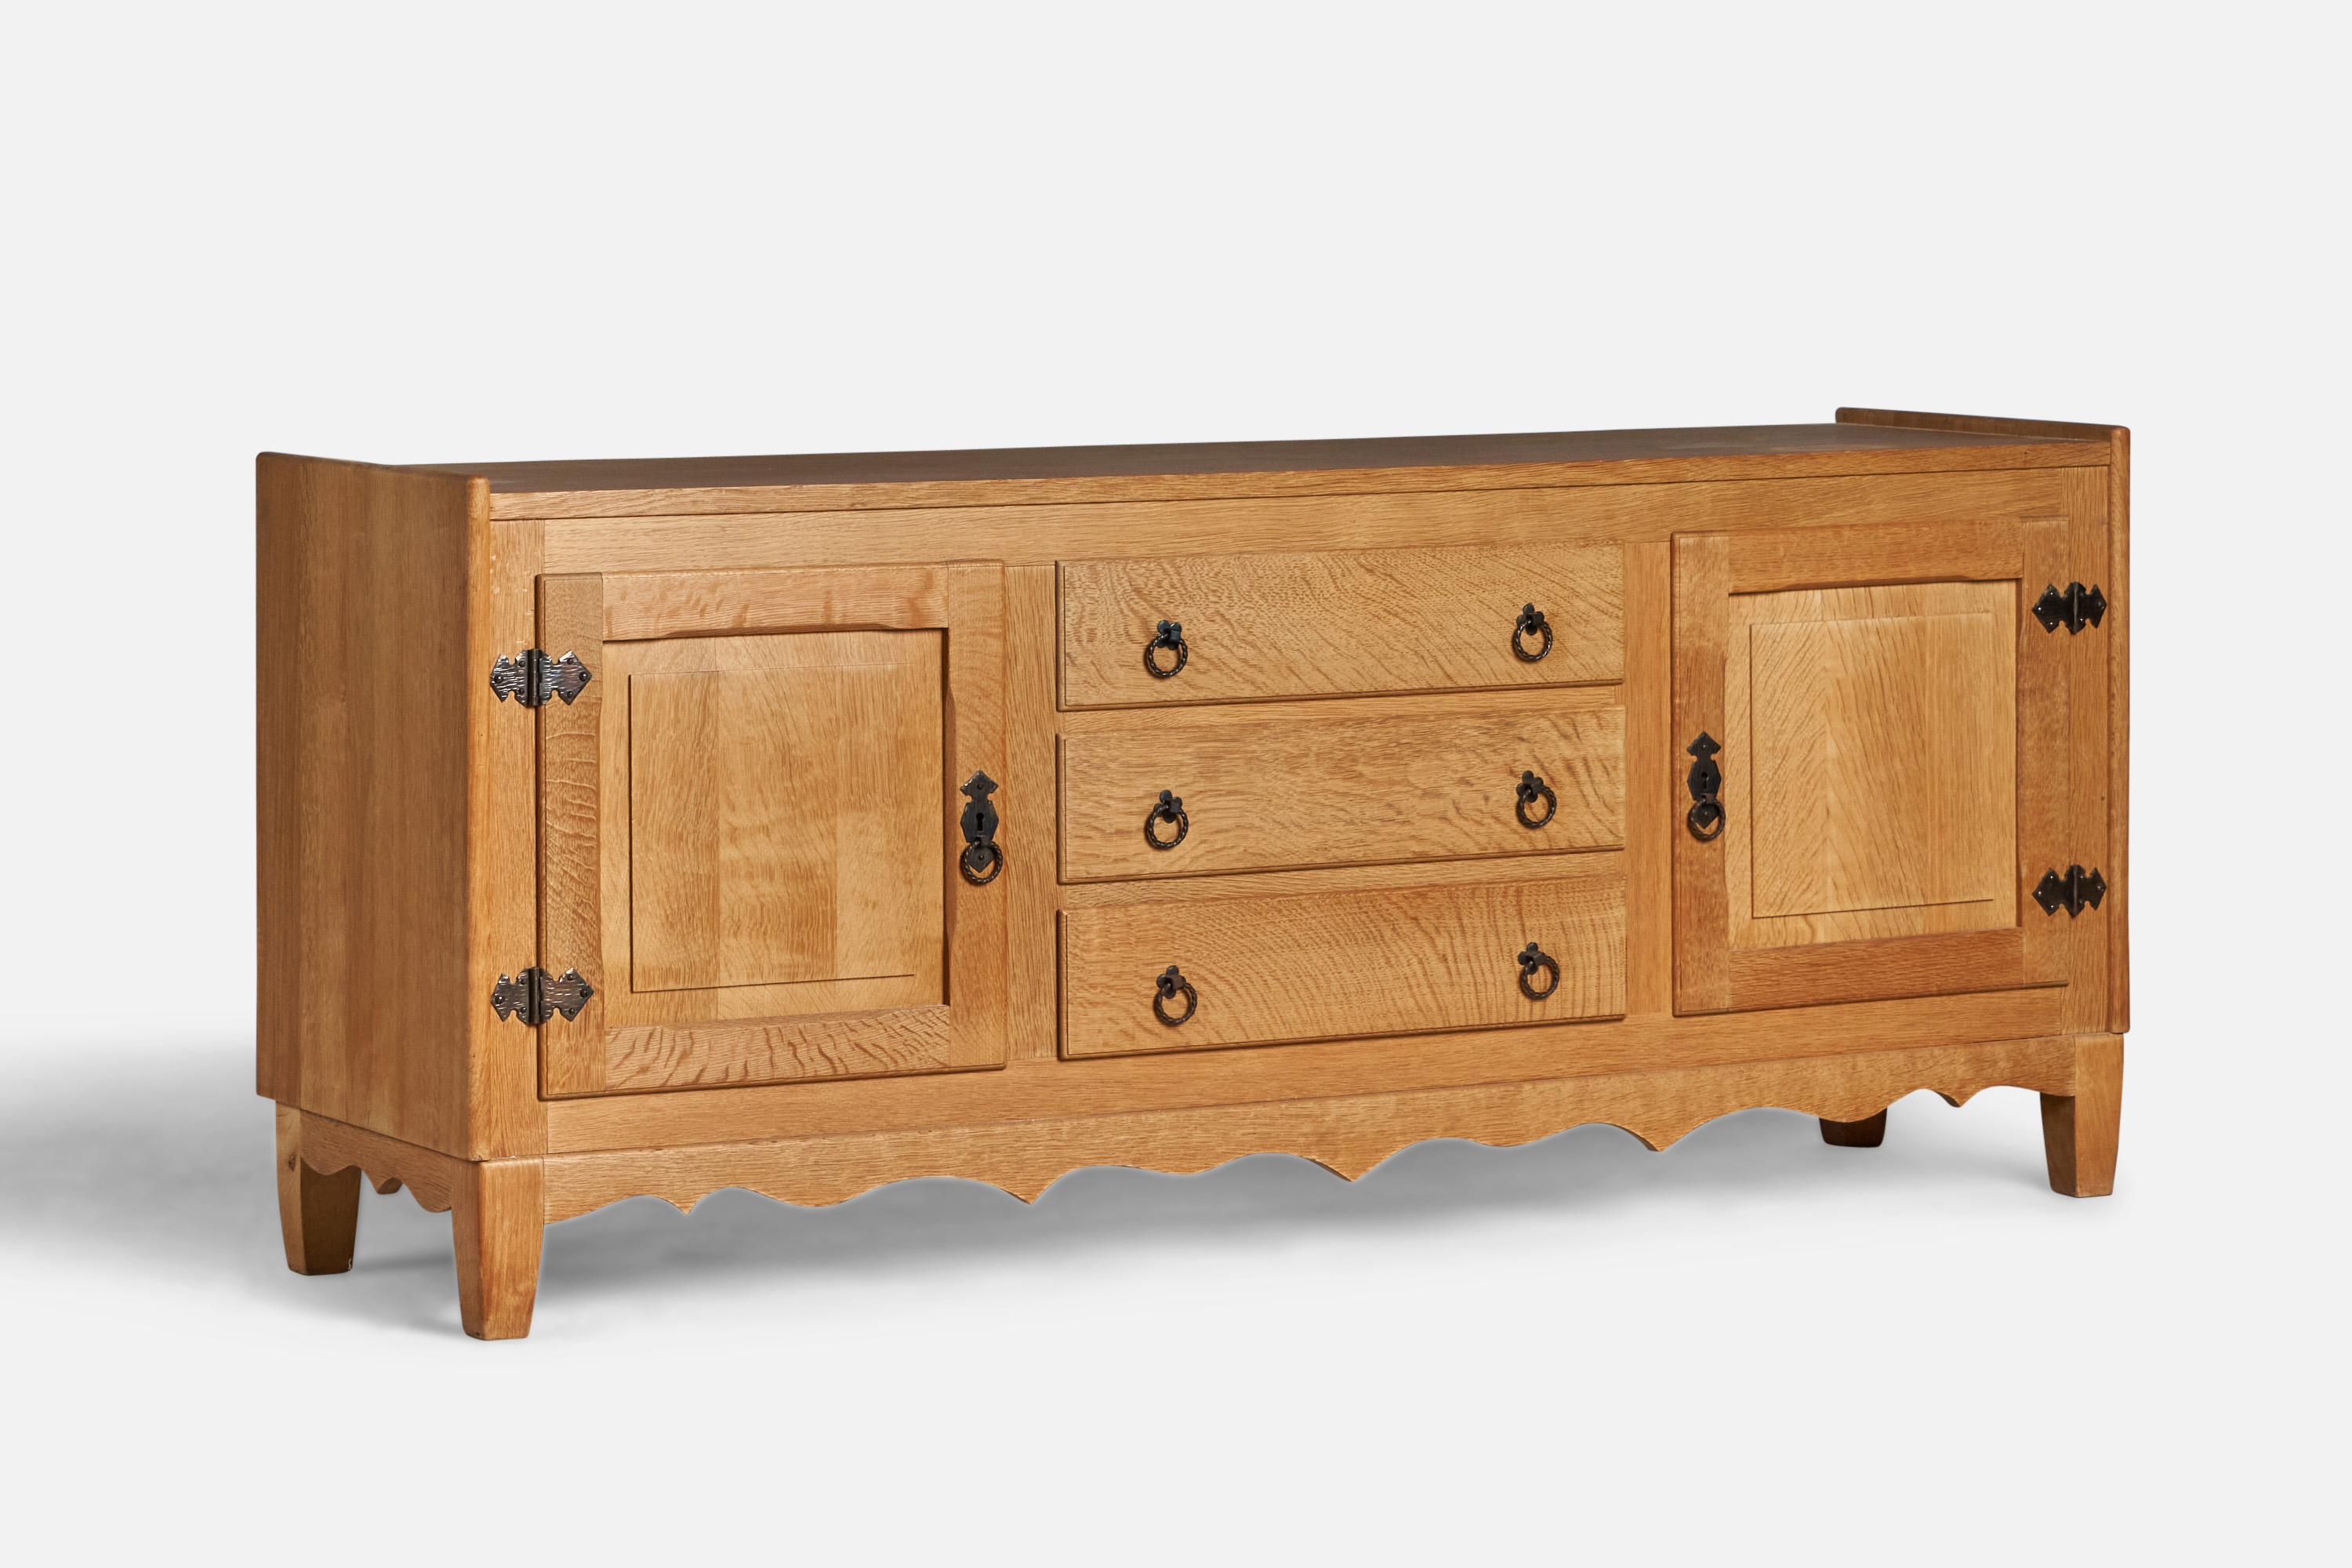 An oak and metal cabinet designed and produced in Denmark, c. 1950s.